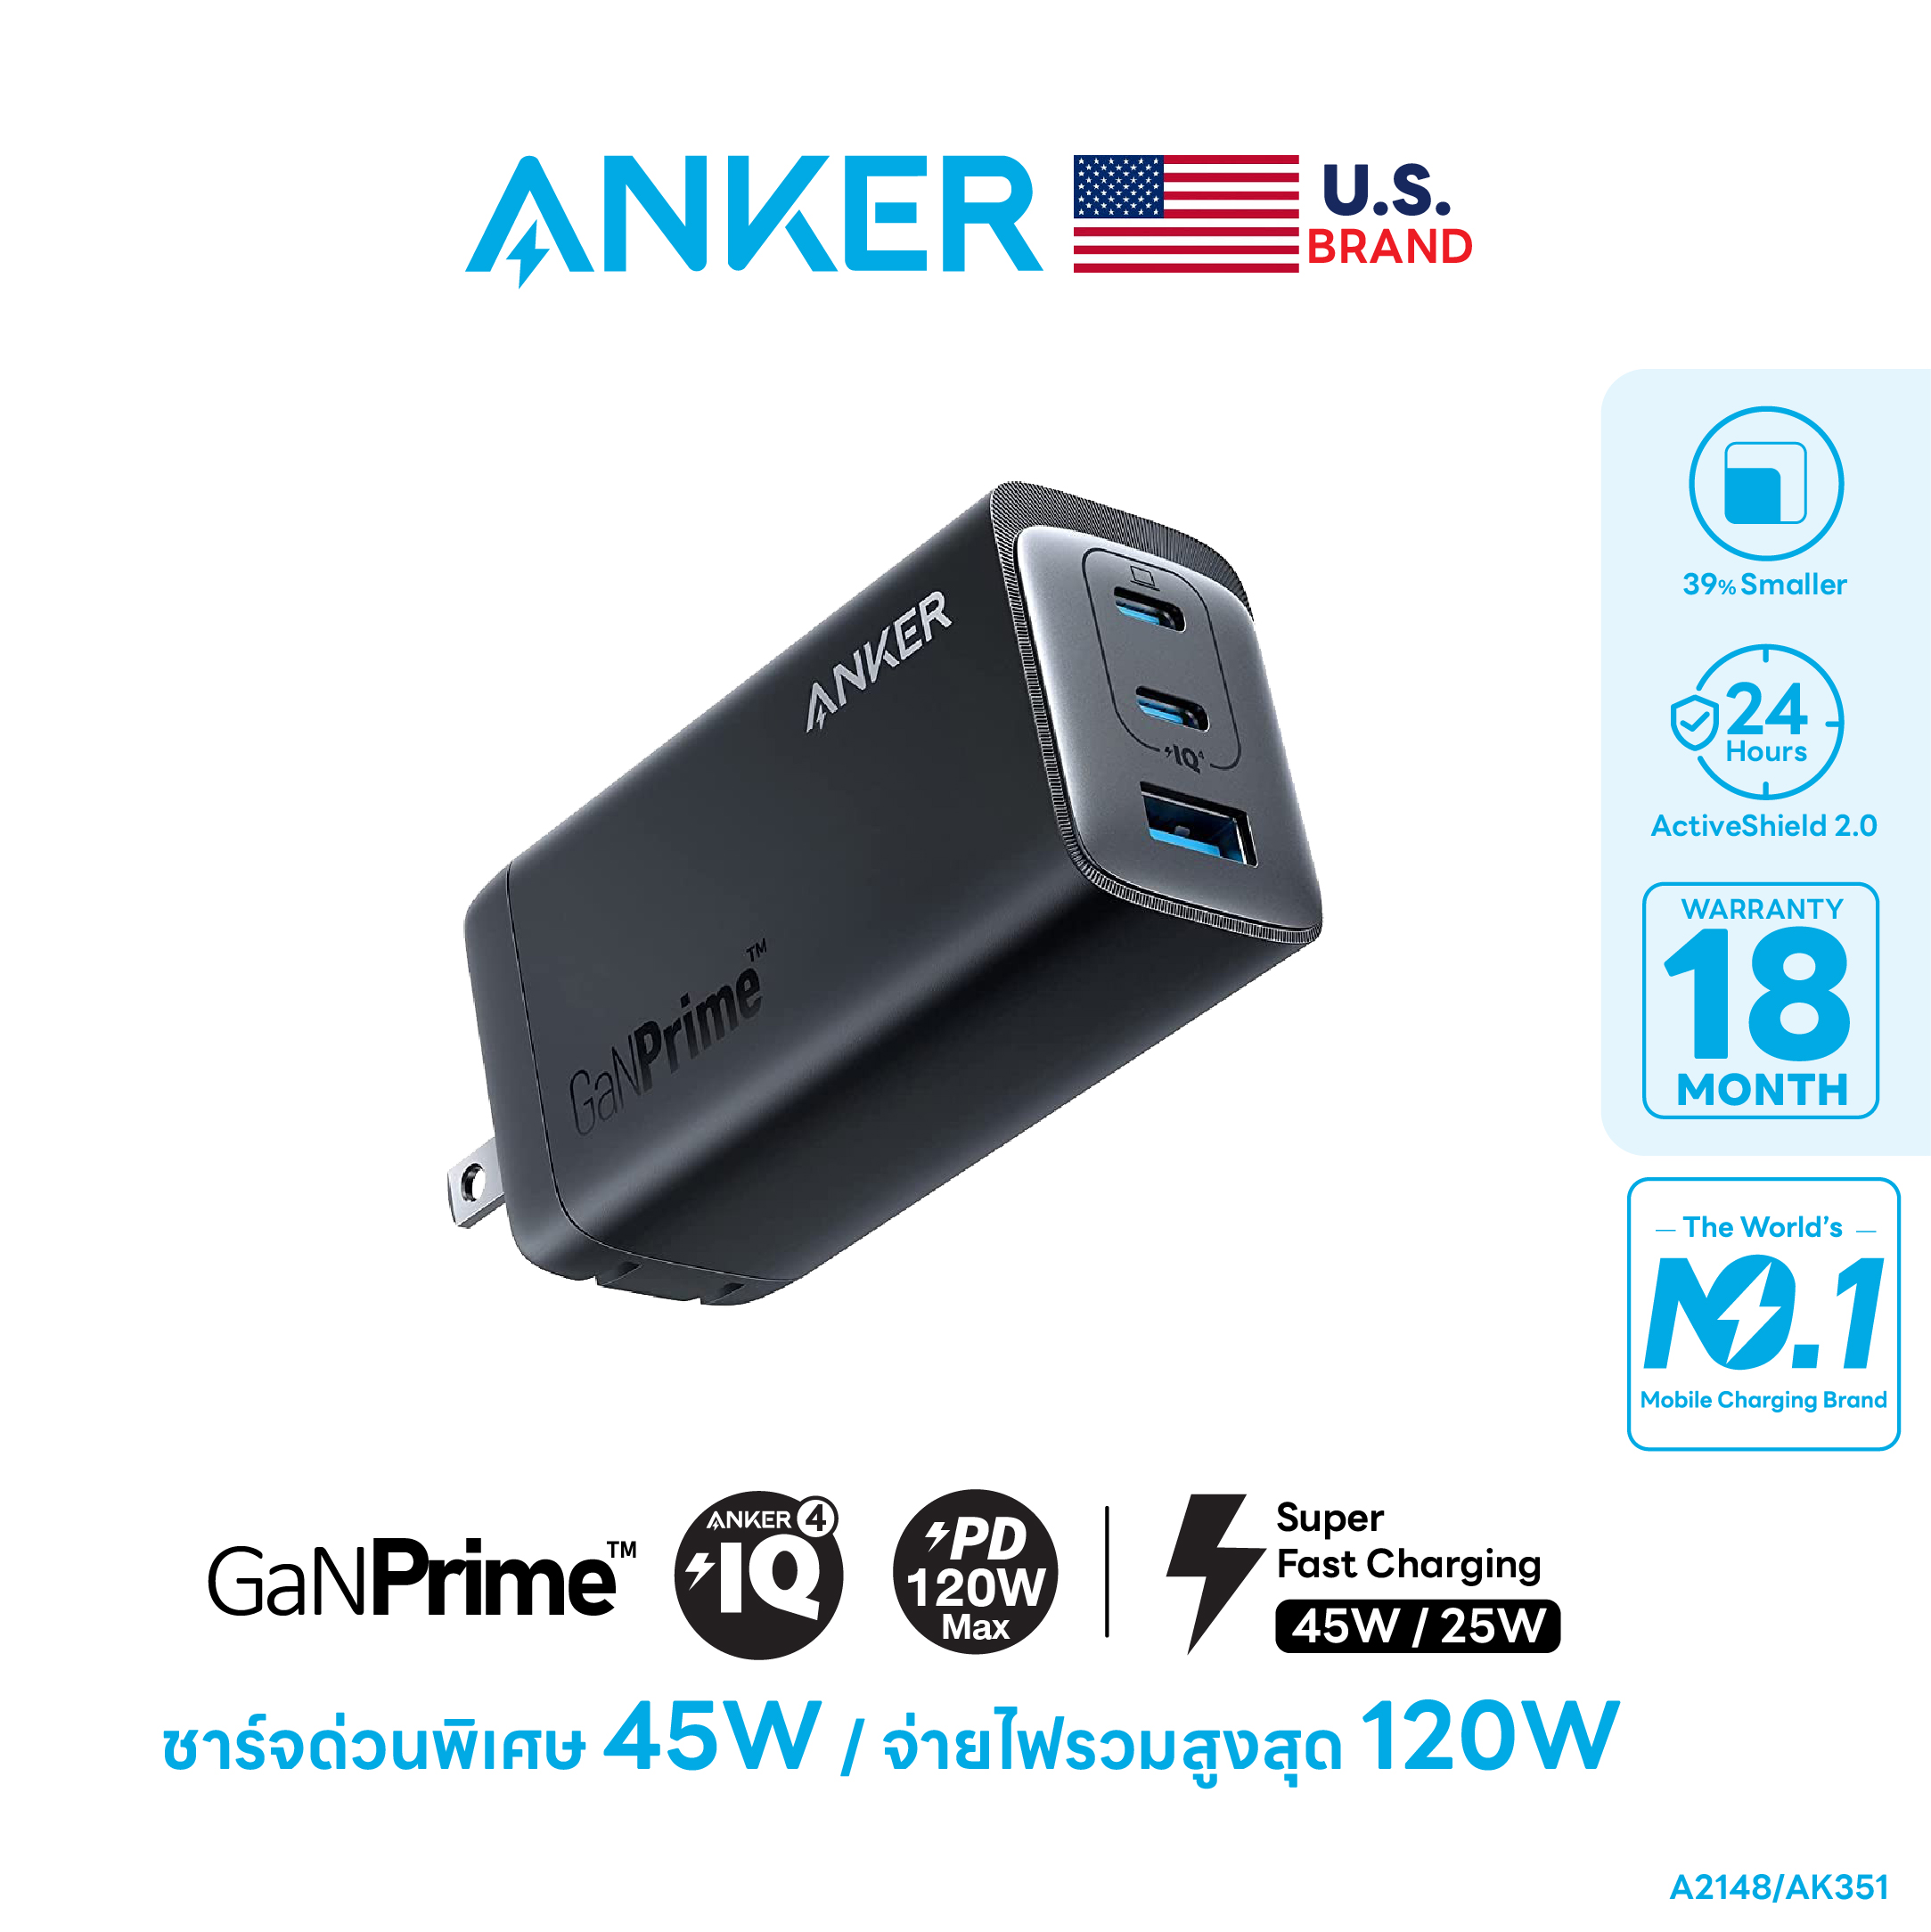 Anker 737 Charger (GaNPrime 120W) - TH